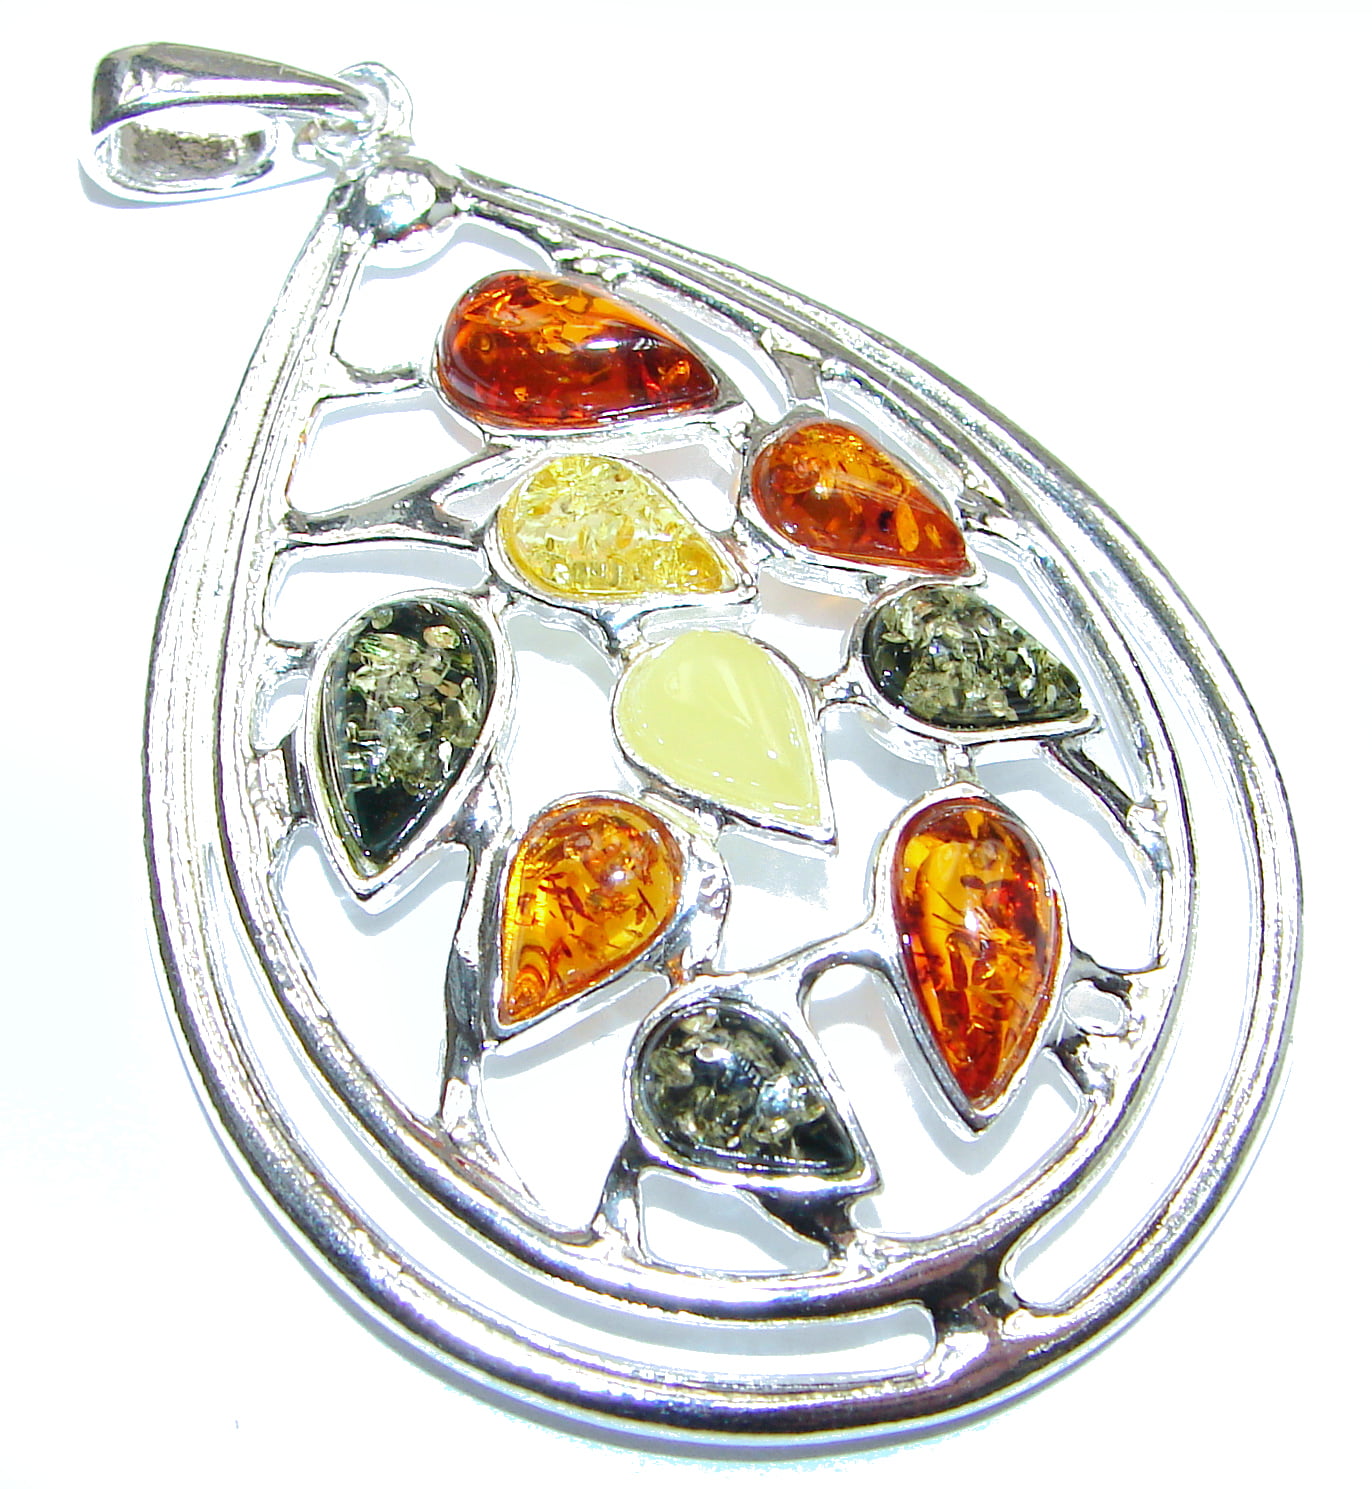 BALTIC AMBER STERLING SILVER 925 ELEPHANT ANIMAL PENDANT NECKLACE JEWELLERY